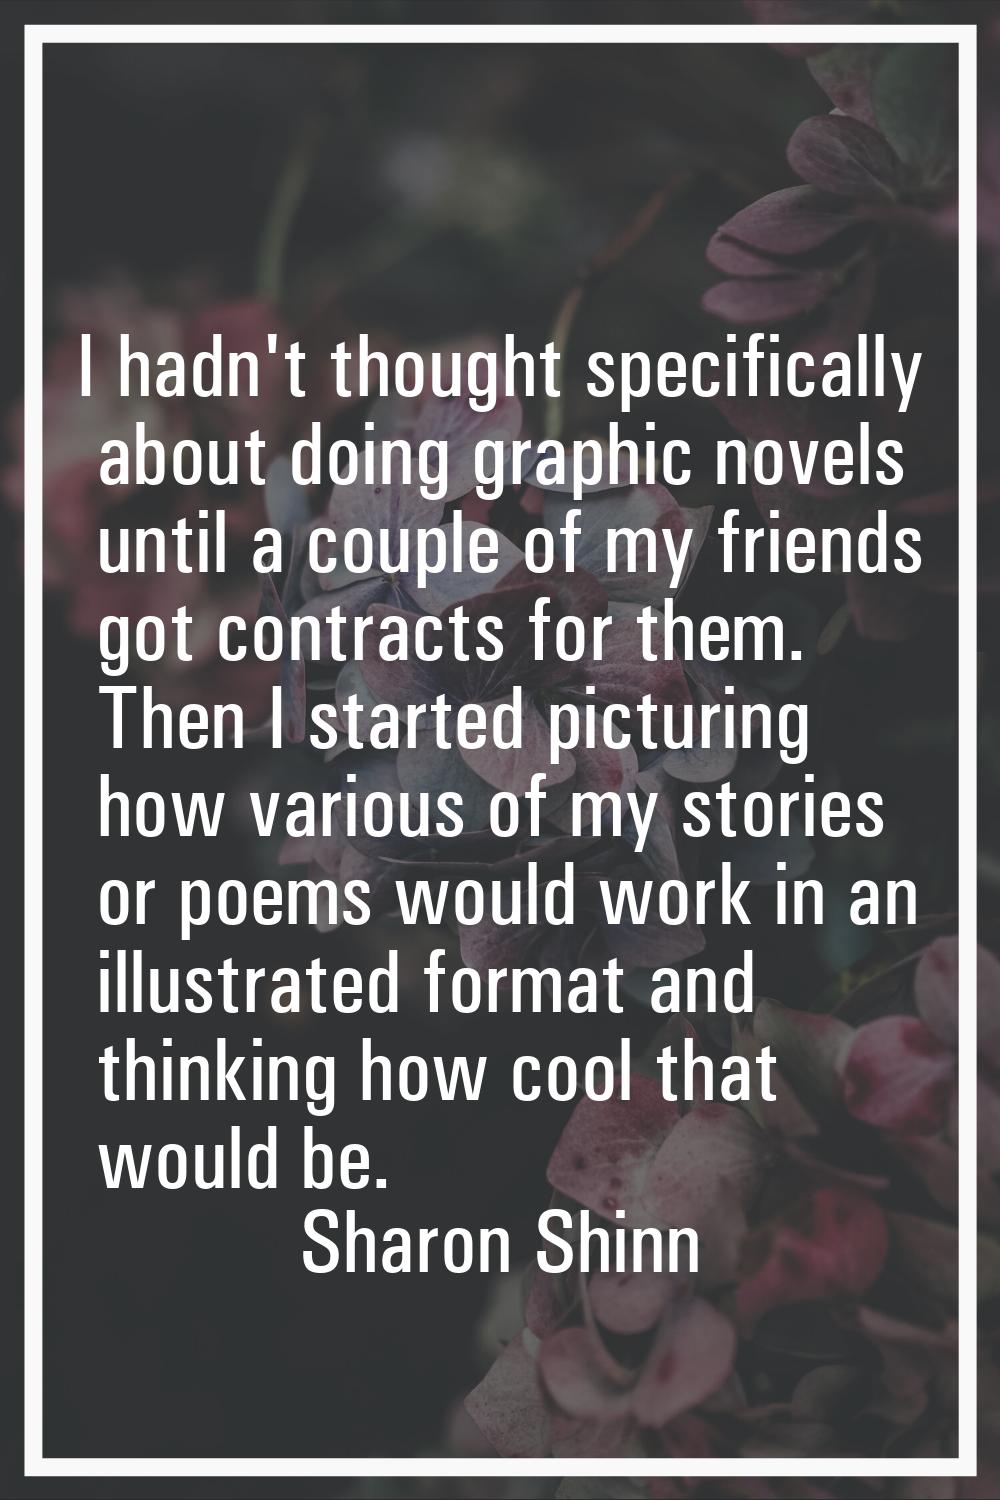 I hadn't thought specifically about doing graphic novels until a couple of my friends got contracts